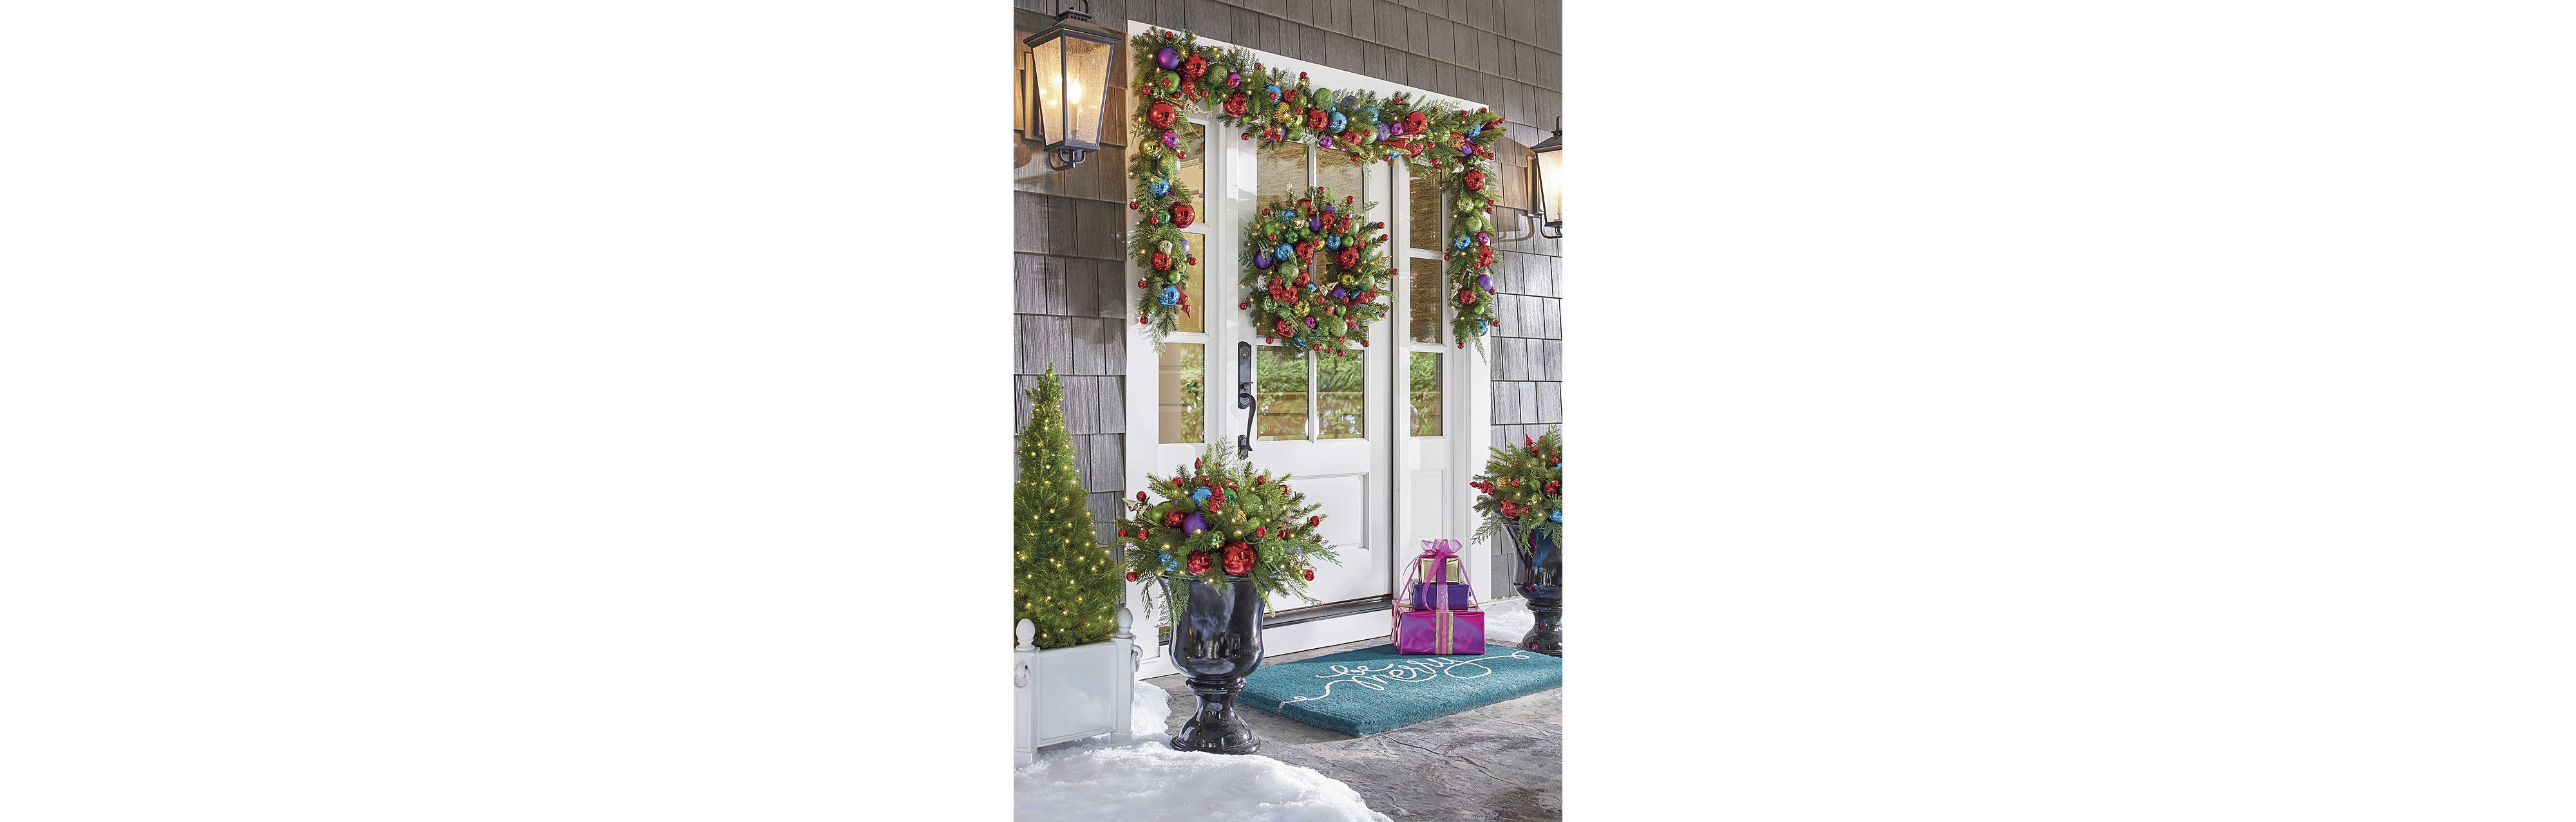 10 Classic Front Porch Christmas Decorations to Make Your Home Festive